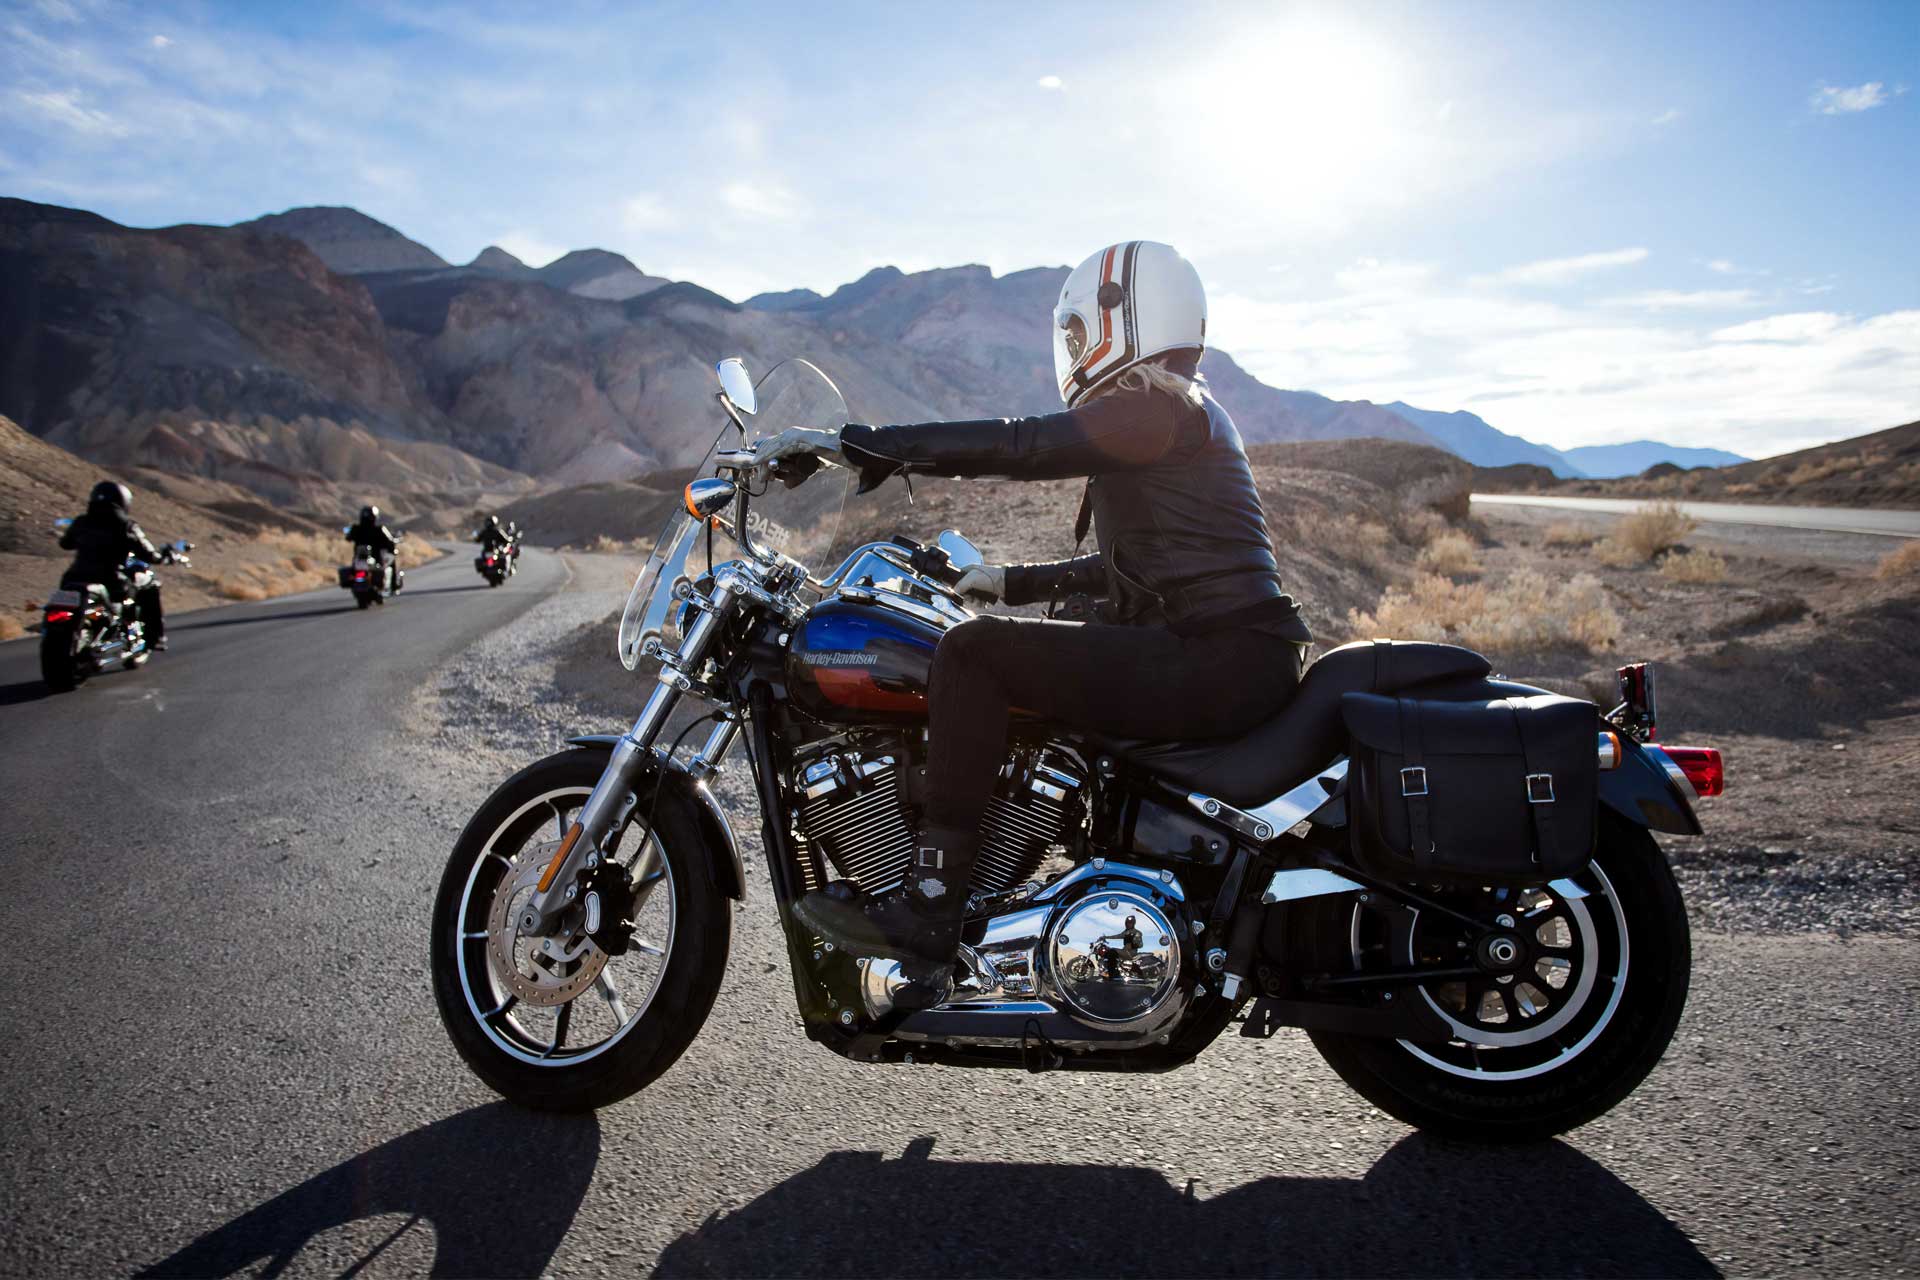 Make your Road Trips memorable with your own Premium Bike